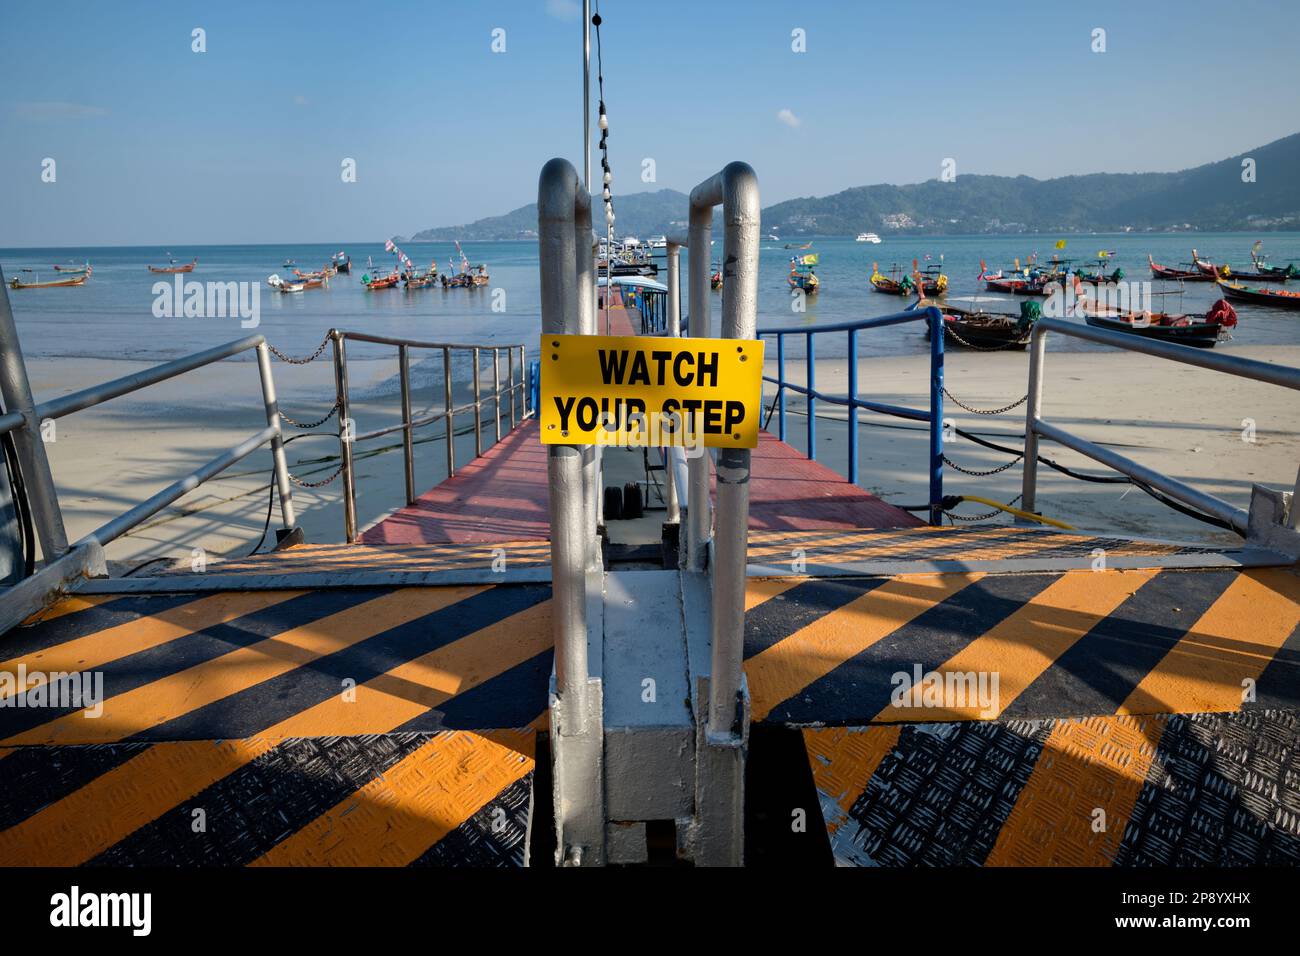 'Watch Your Step' warning sign at the pier of Patong, Patong Beach, Patong Bay, Phuket, Thailand, so-called longtail boats anchored in the background Stock Photo